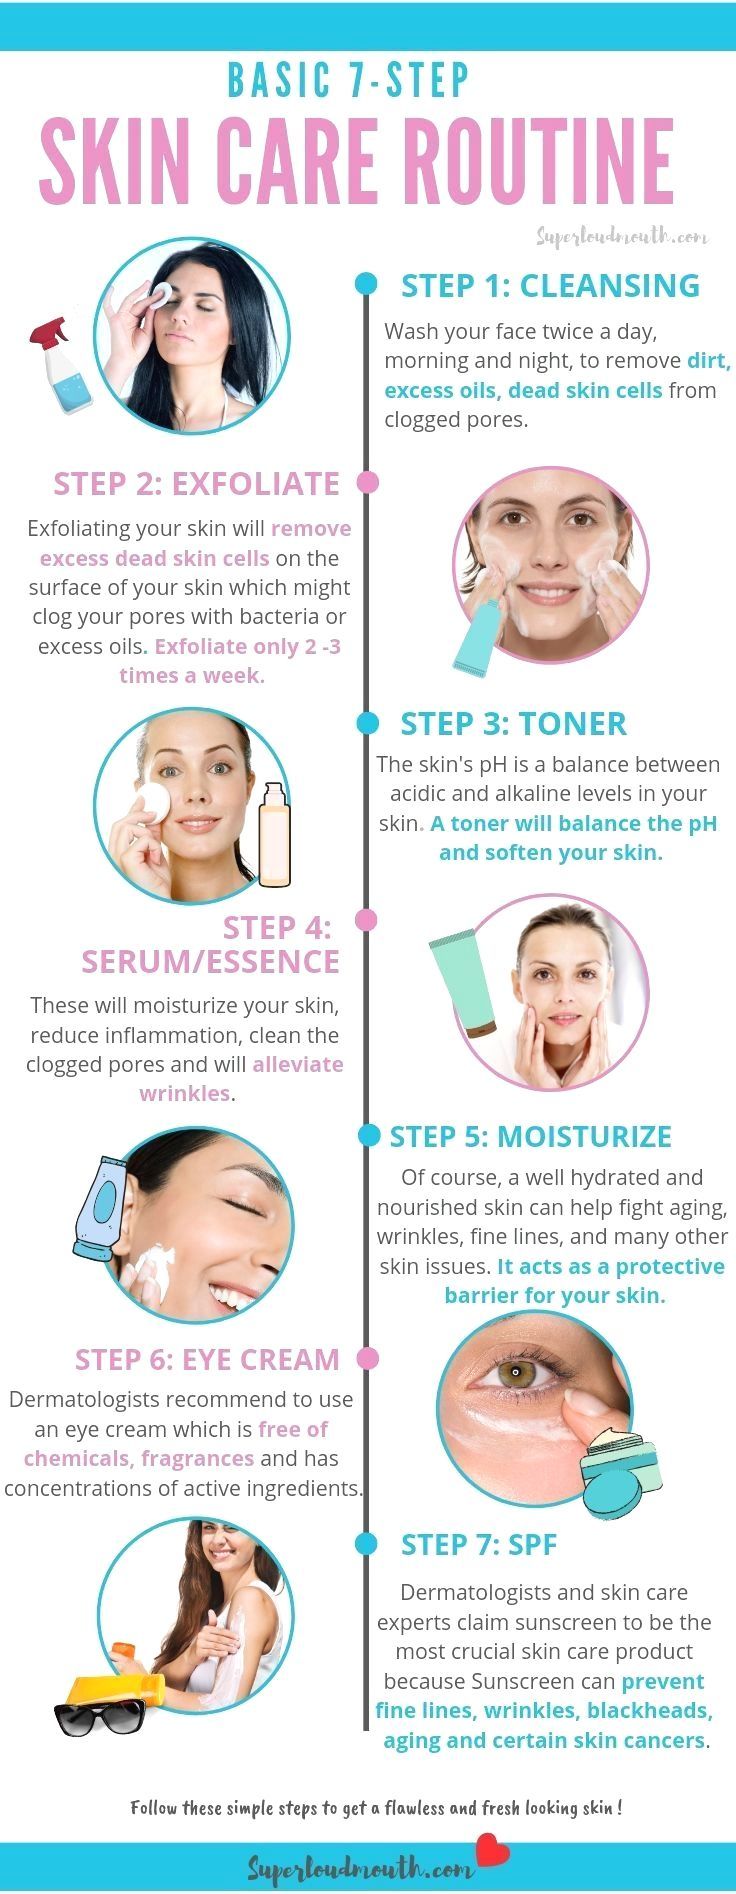 6 Precious Tips To Help You Get Better At Daily Skin Care Routine -   18 skin care Regimen cleanses ideas